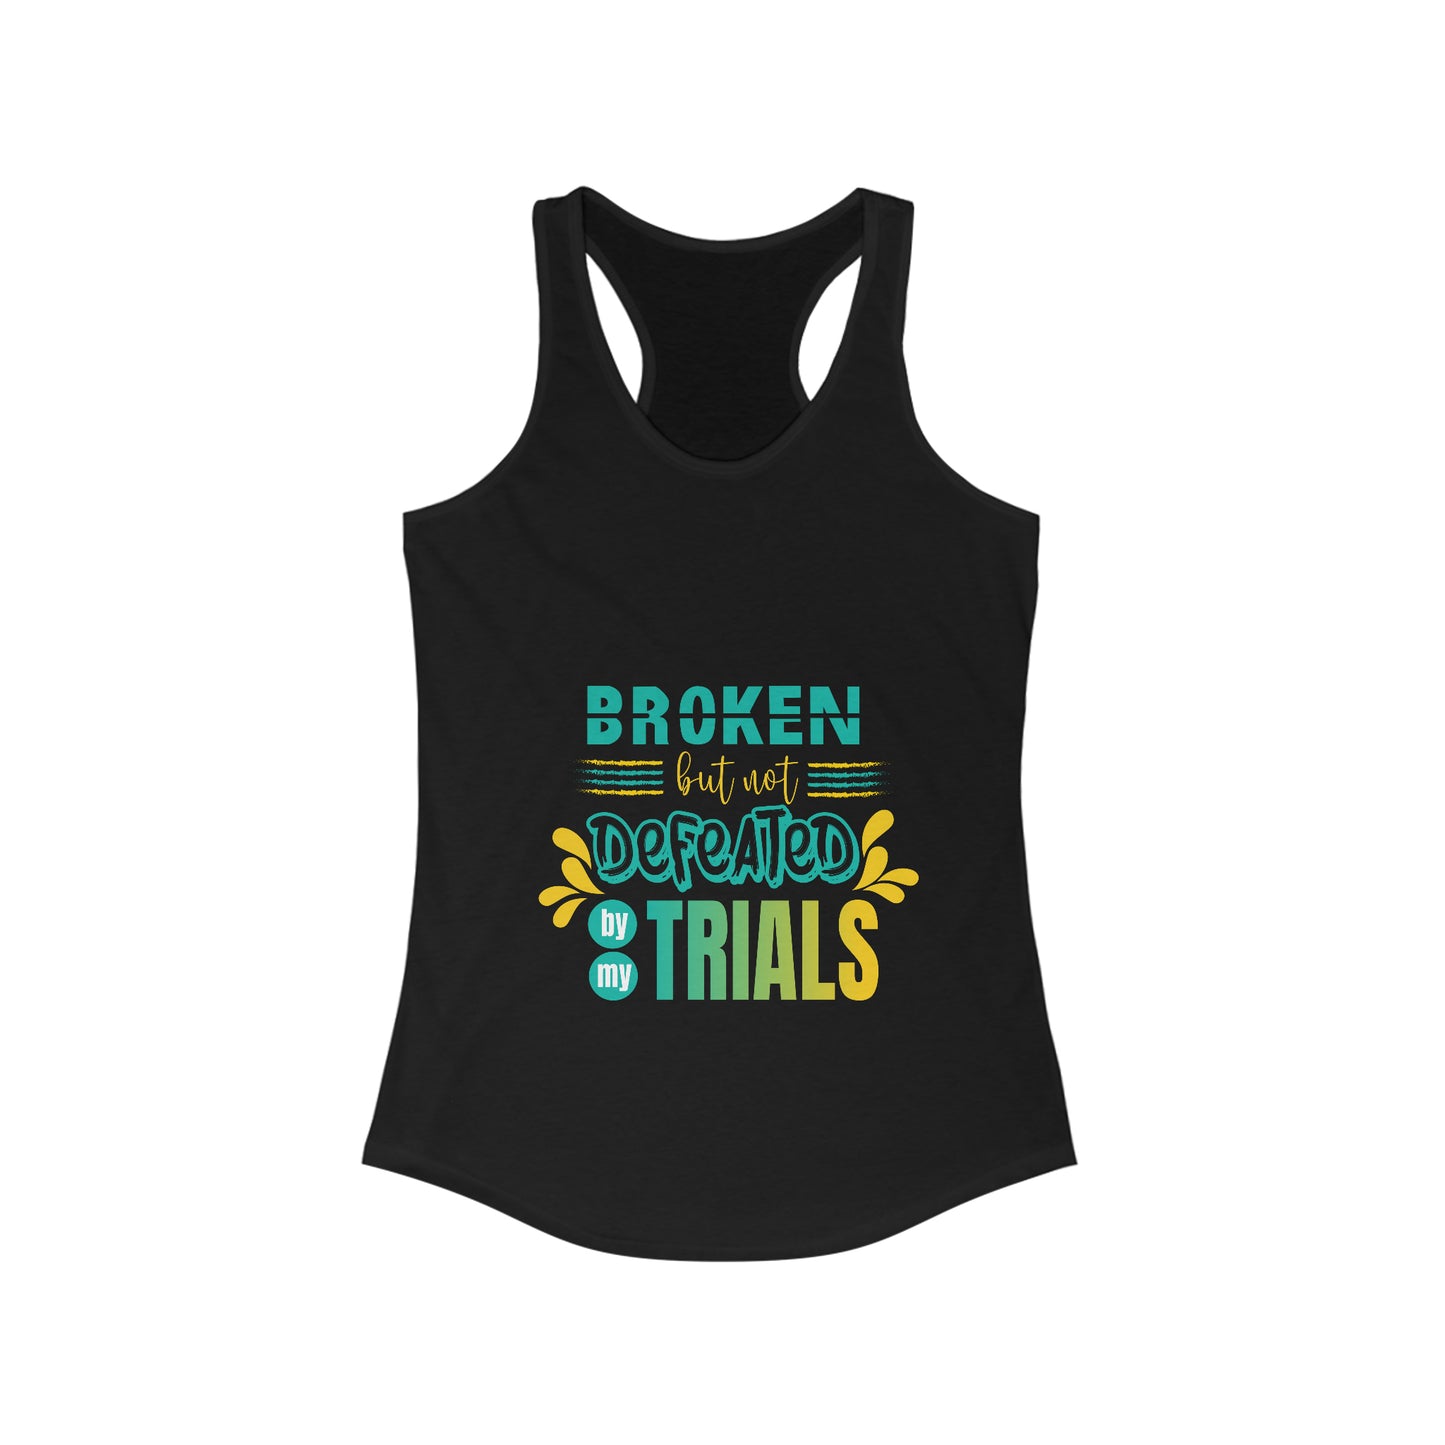 Broken but not Defeated By My Trials slim fit tank-top